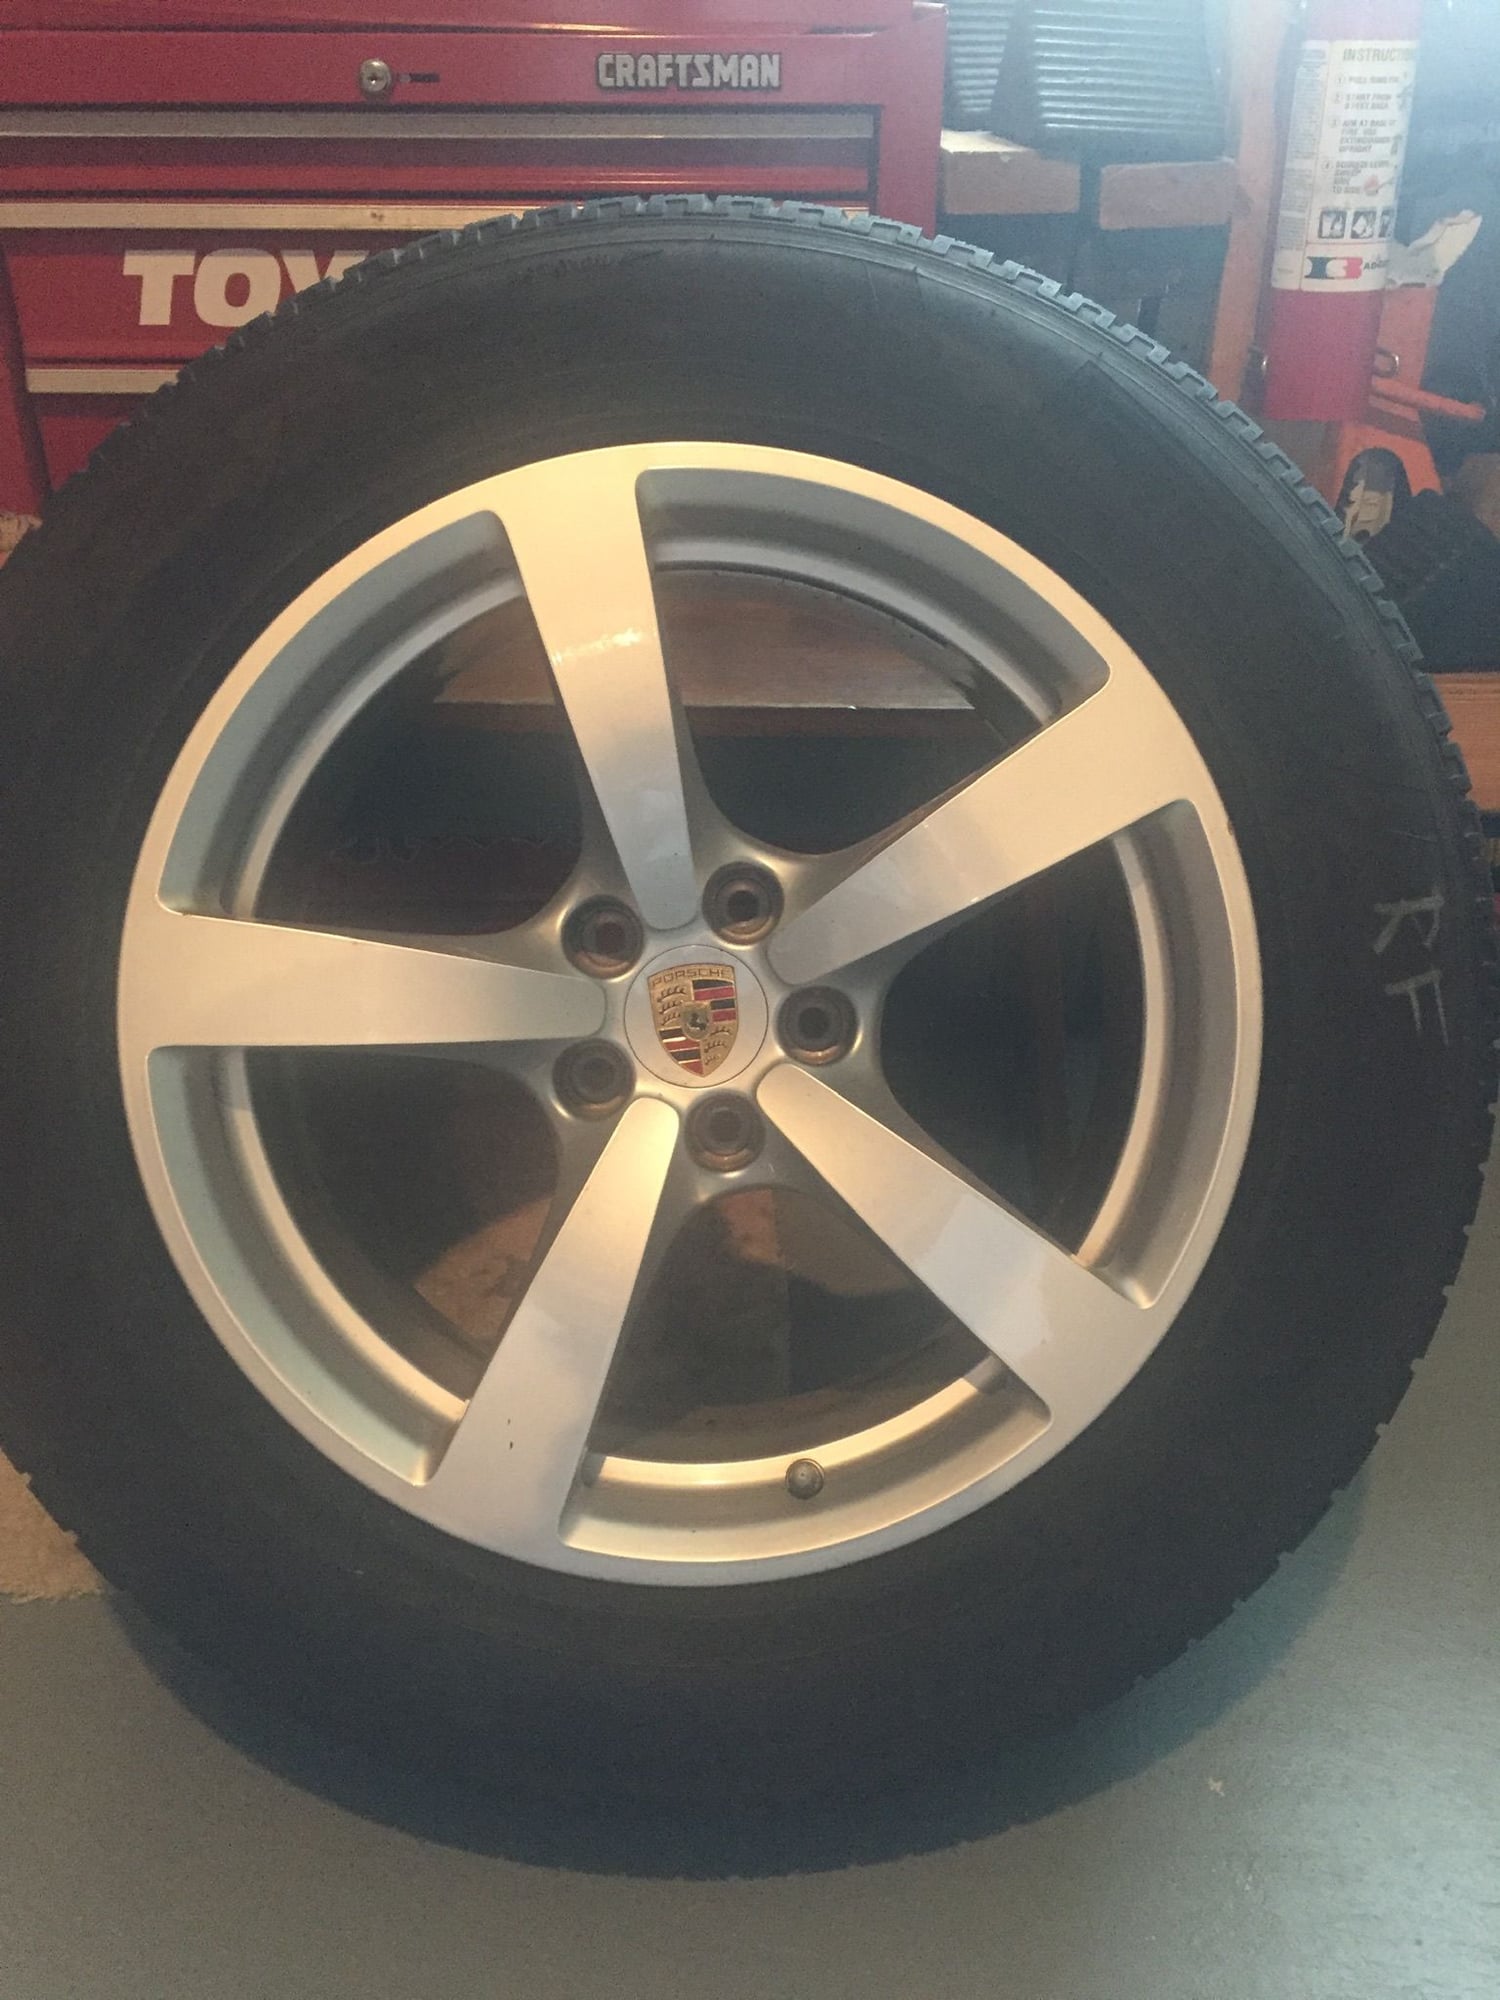 Wheels and Tires/Axles - Macan 18" Winter Wheels - Used - North Royalton, OH 44133, United States